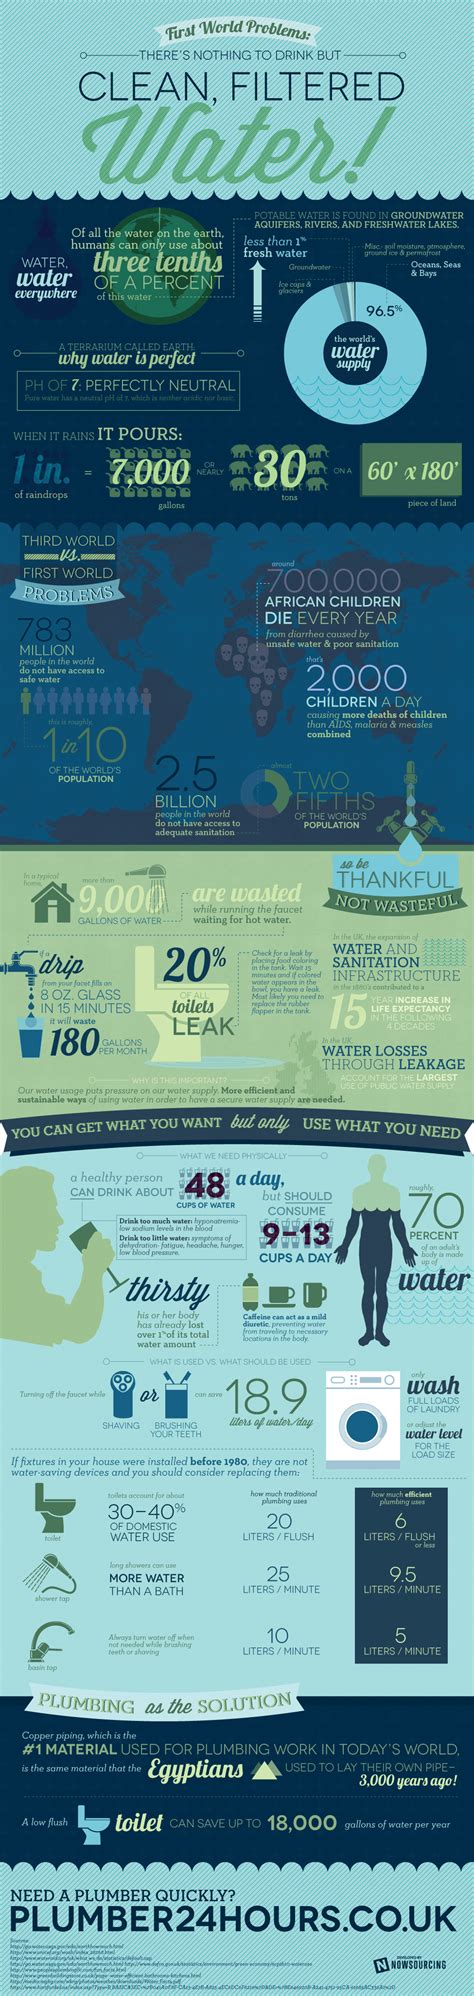 20 More Amazing Water Facts Infographic Water Facts Educational